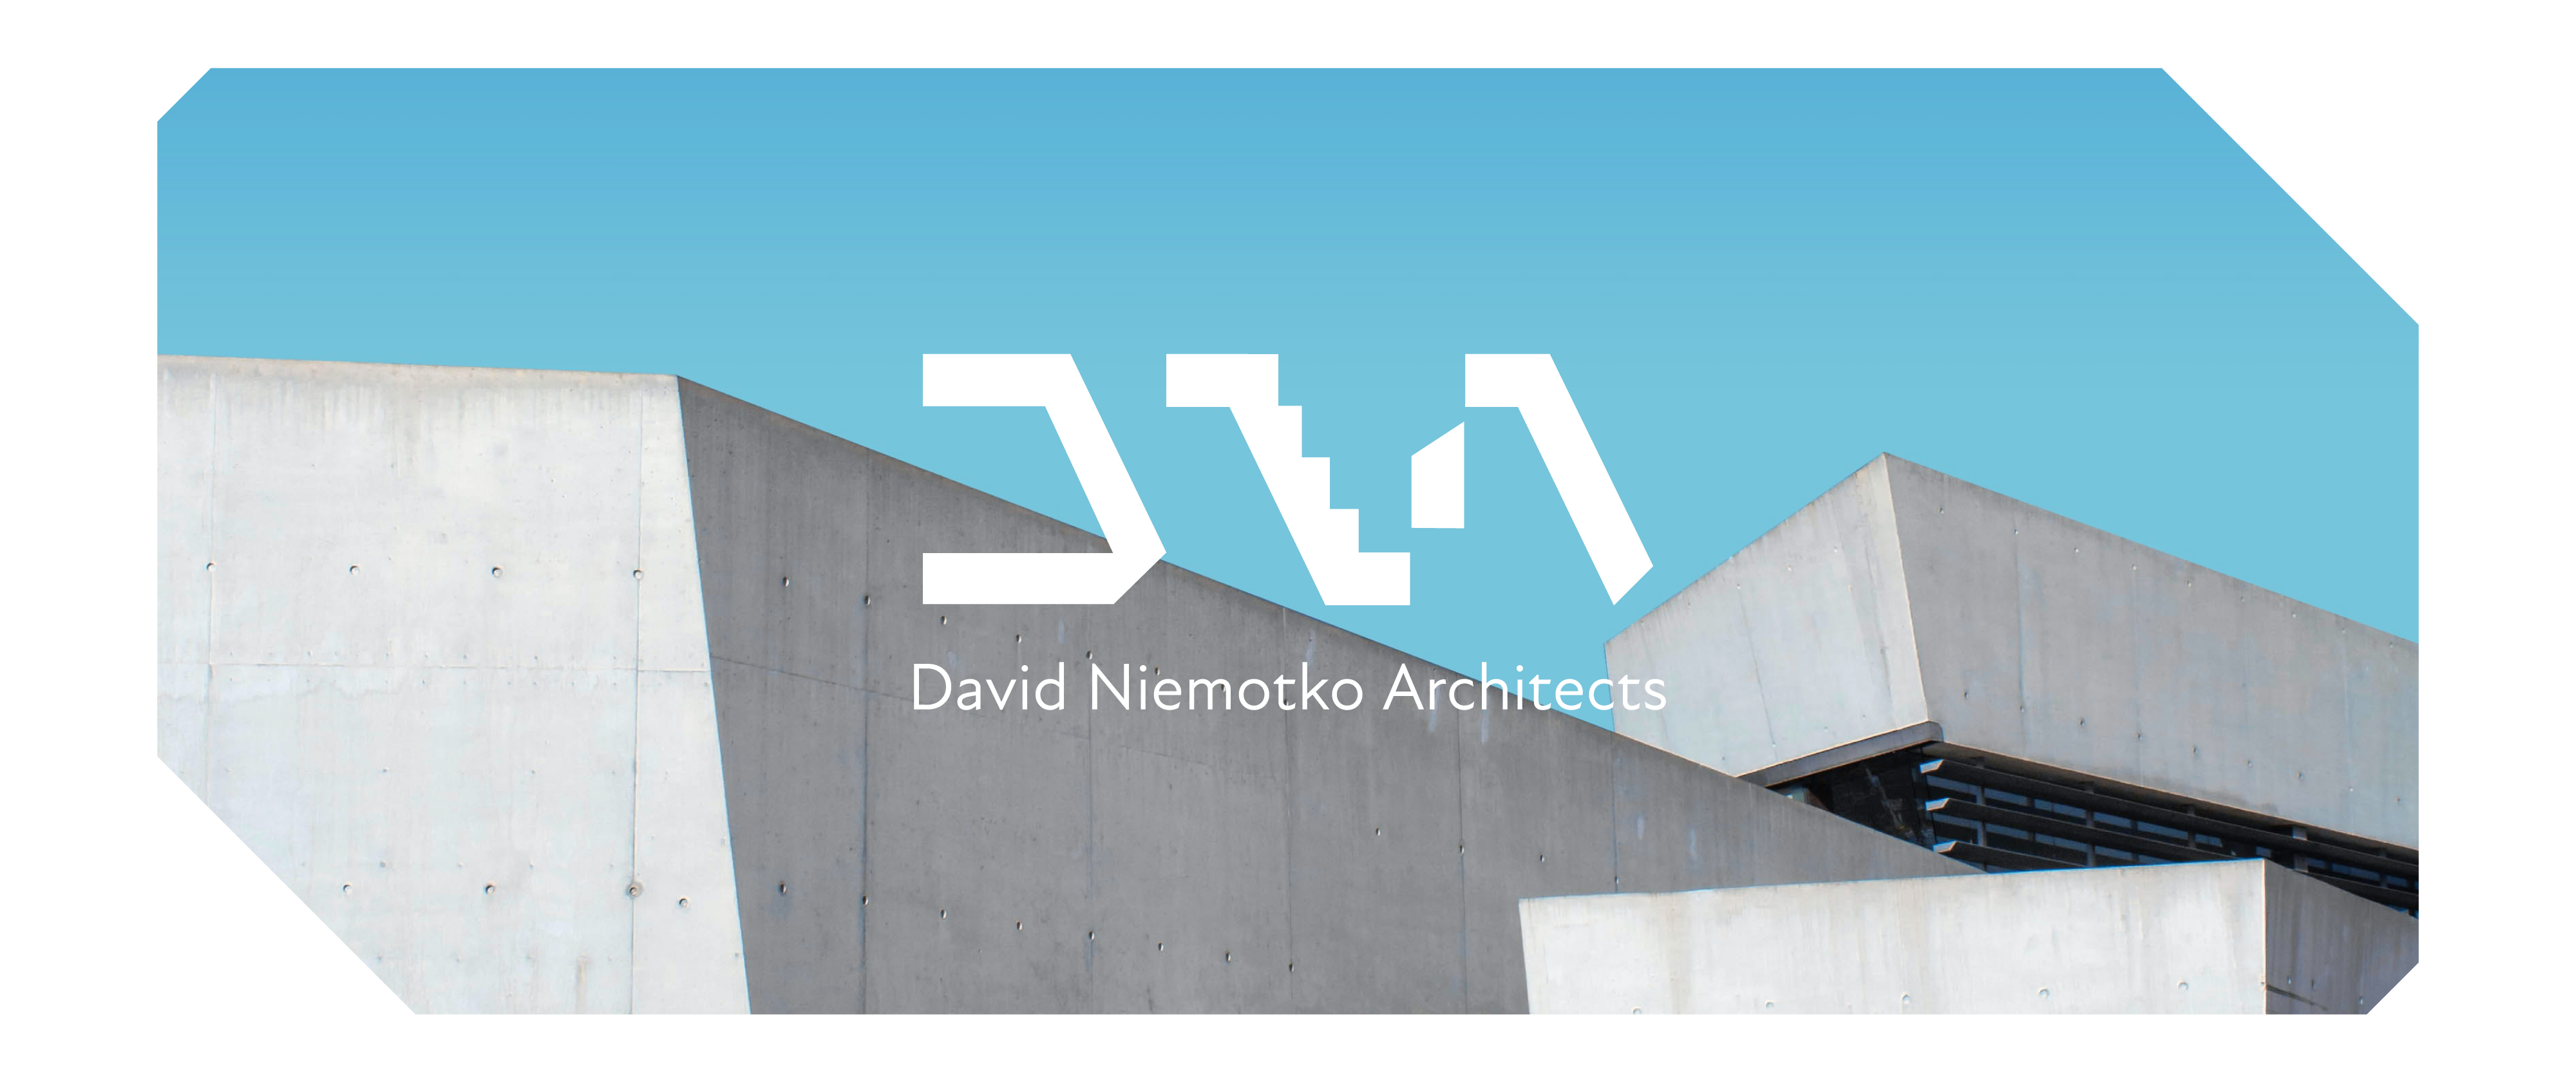 Logo Design for International Architecture Firm - Earning Designs 